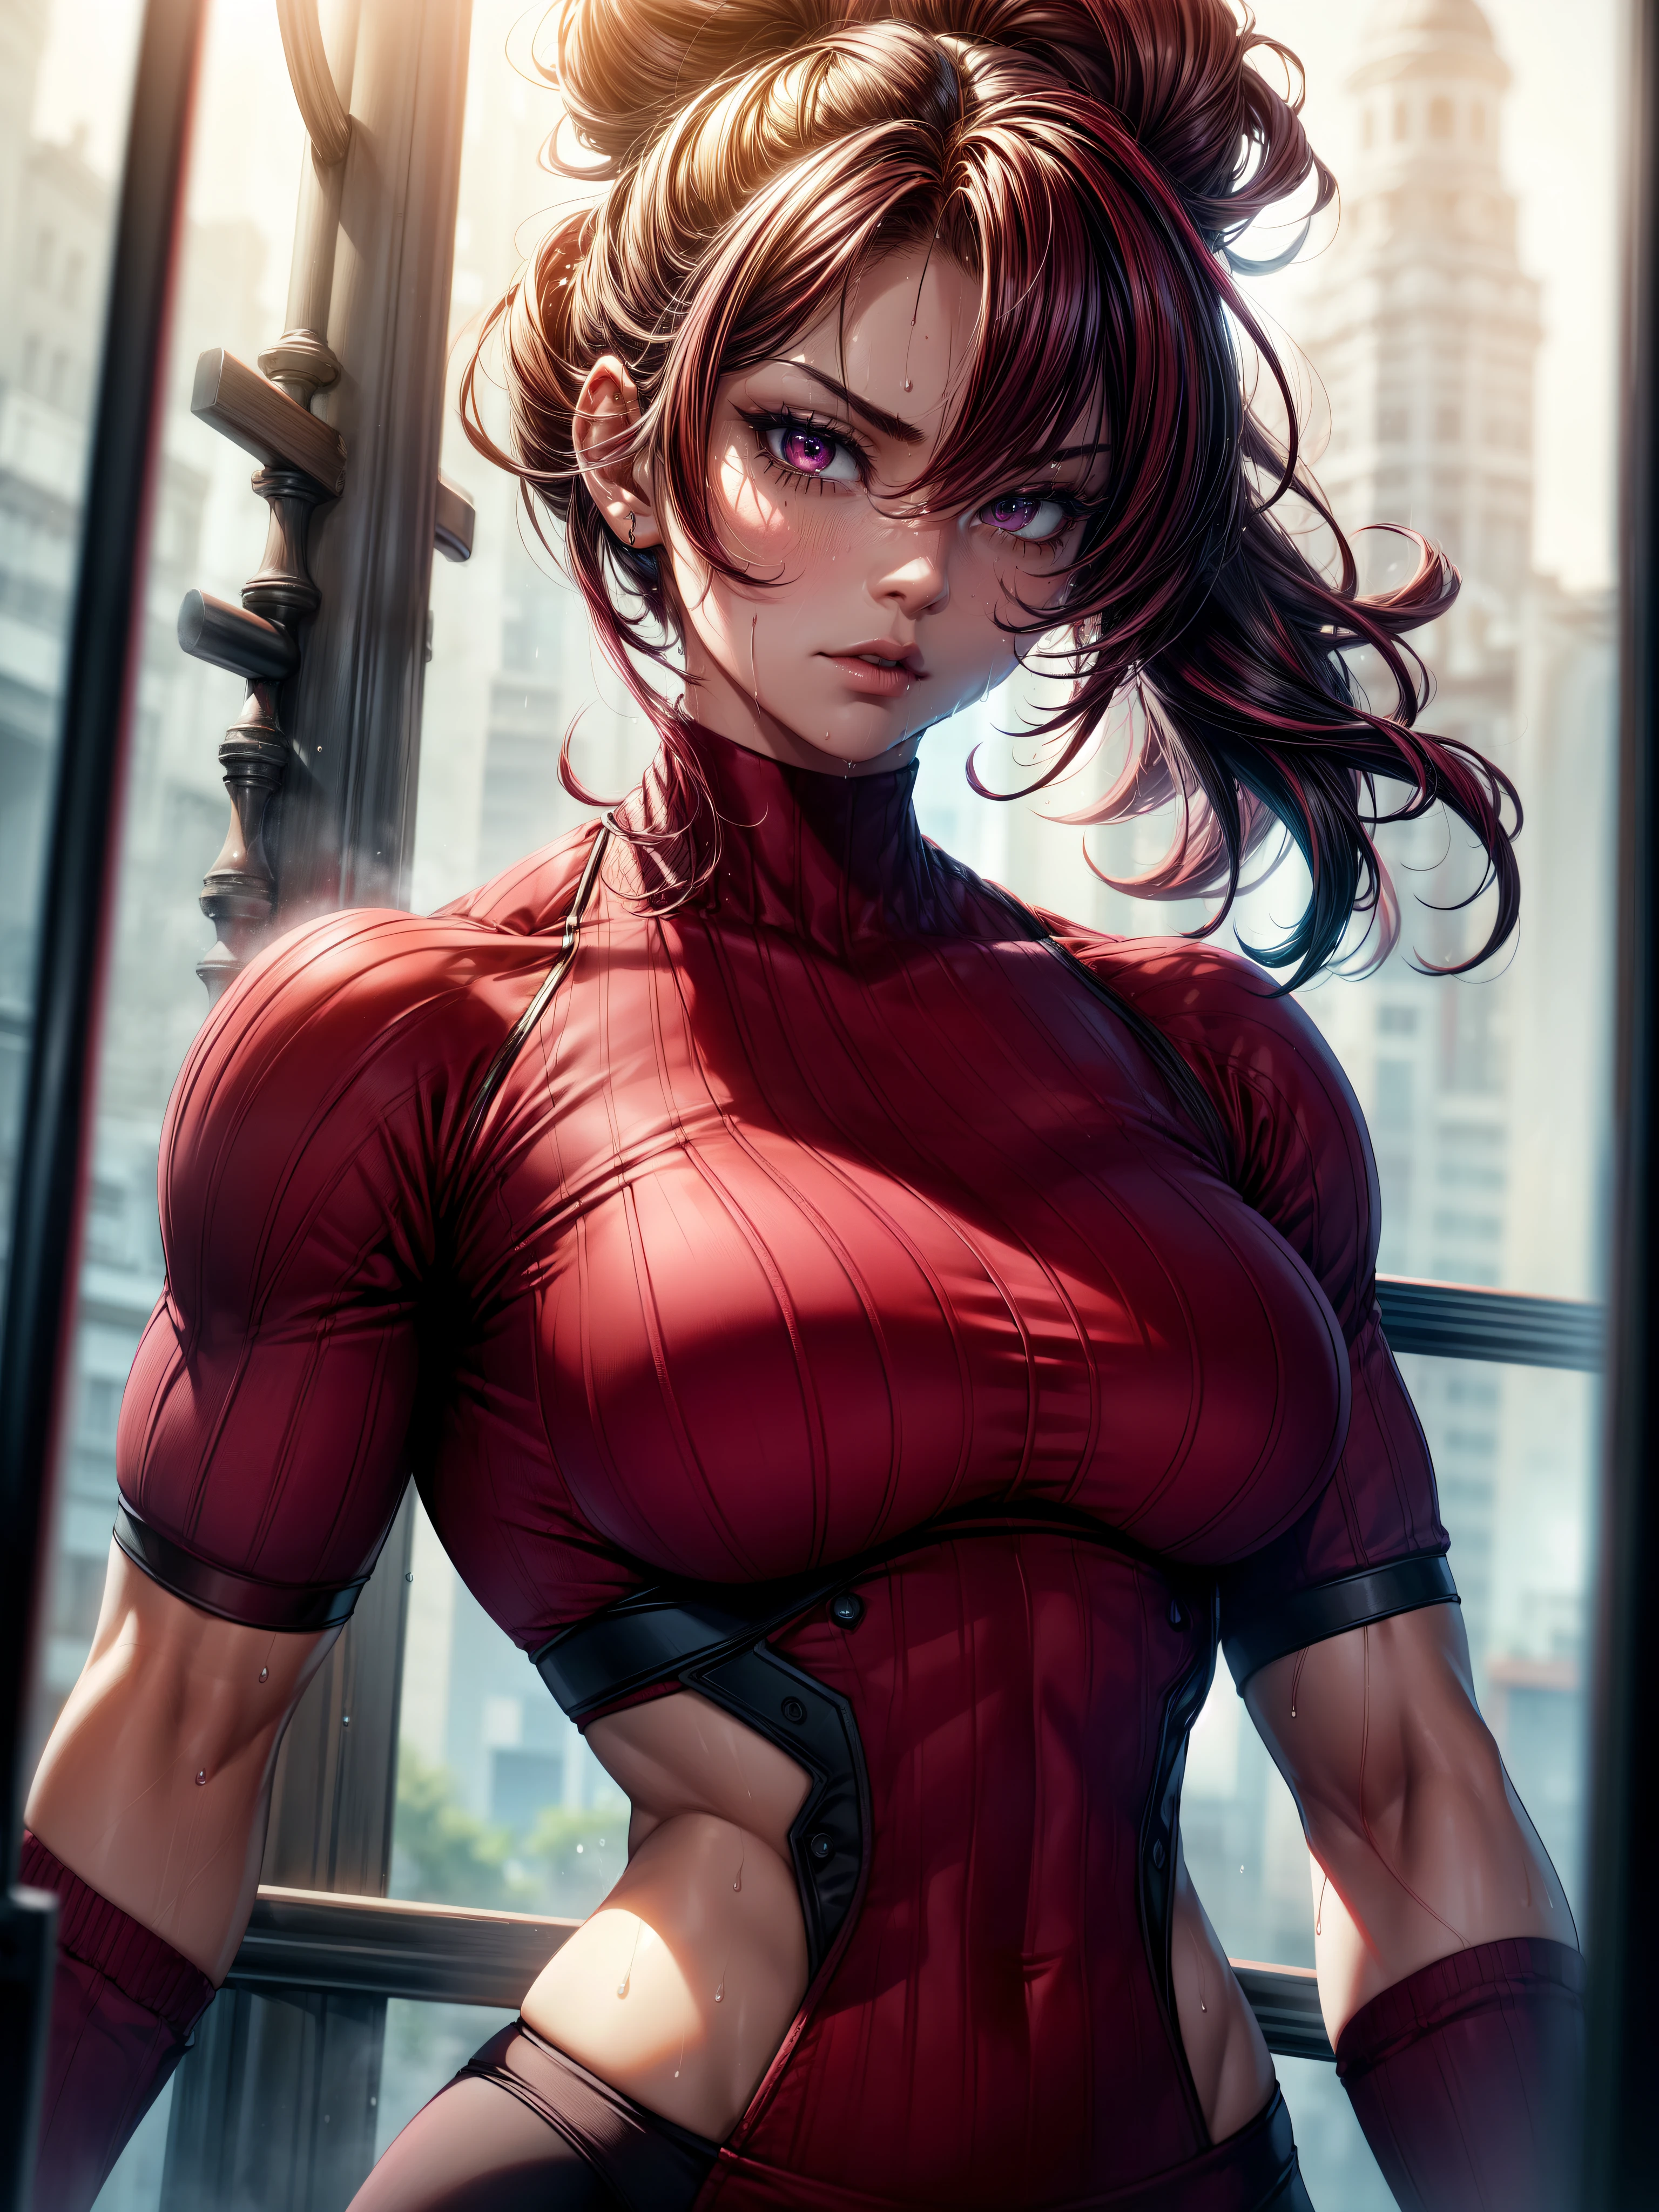 burgandy color, (extremely detailed CG unity 8k wallpaper,masterpiece, best quality, ultra-detailed), realistic illumination, realistic shadows, muscular and ripped, tight white gym clothes, intricate and complex detailing,short and tousled burgandy hair, droplets of sweat, sweaty gym atmosphere.
